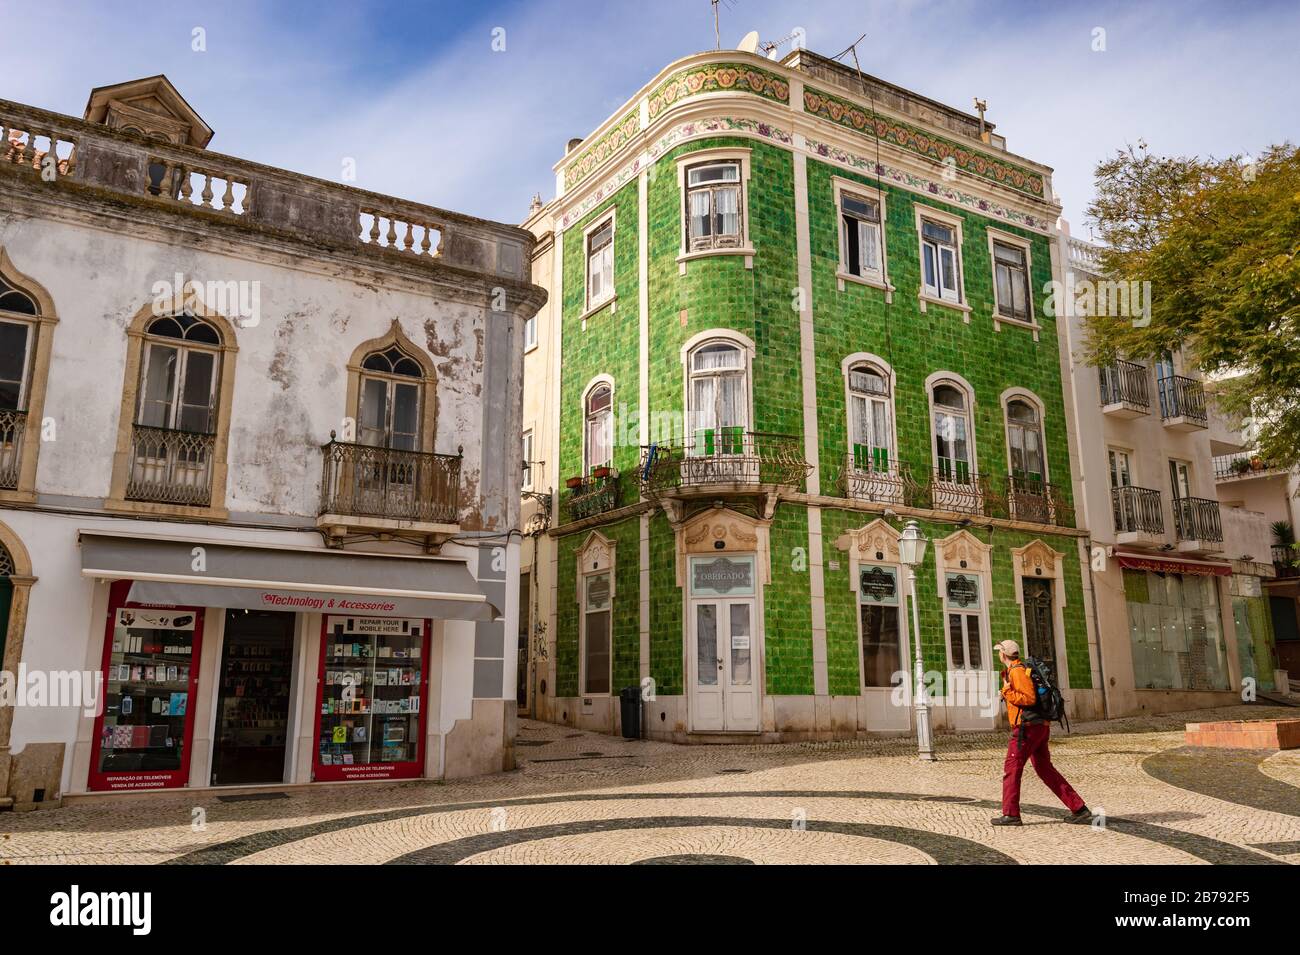 Lagos, Portugal - 5 March 2020: House with green ceramic tiles at the Praca de Camoes Stock Photo